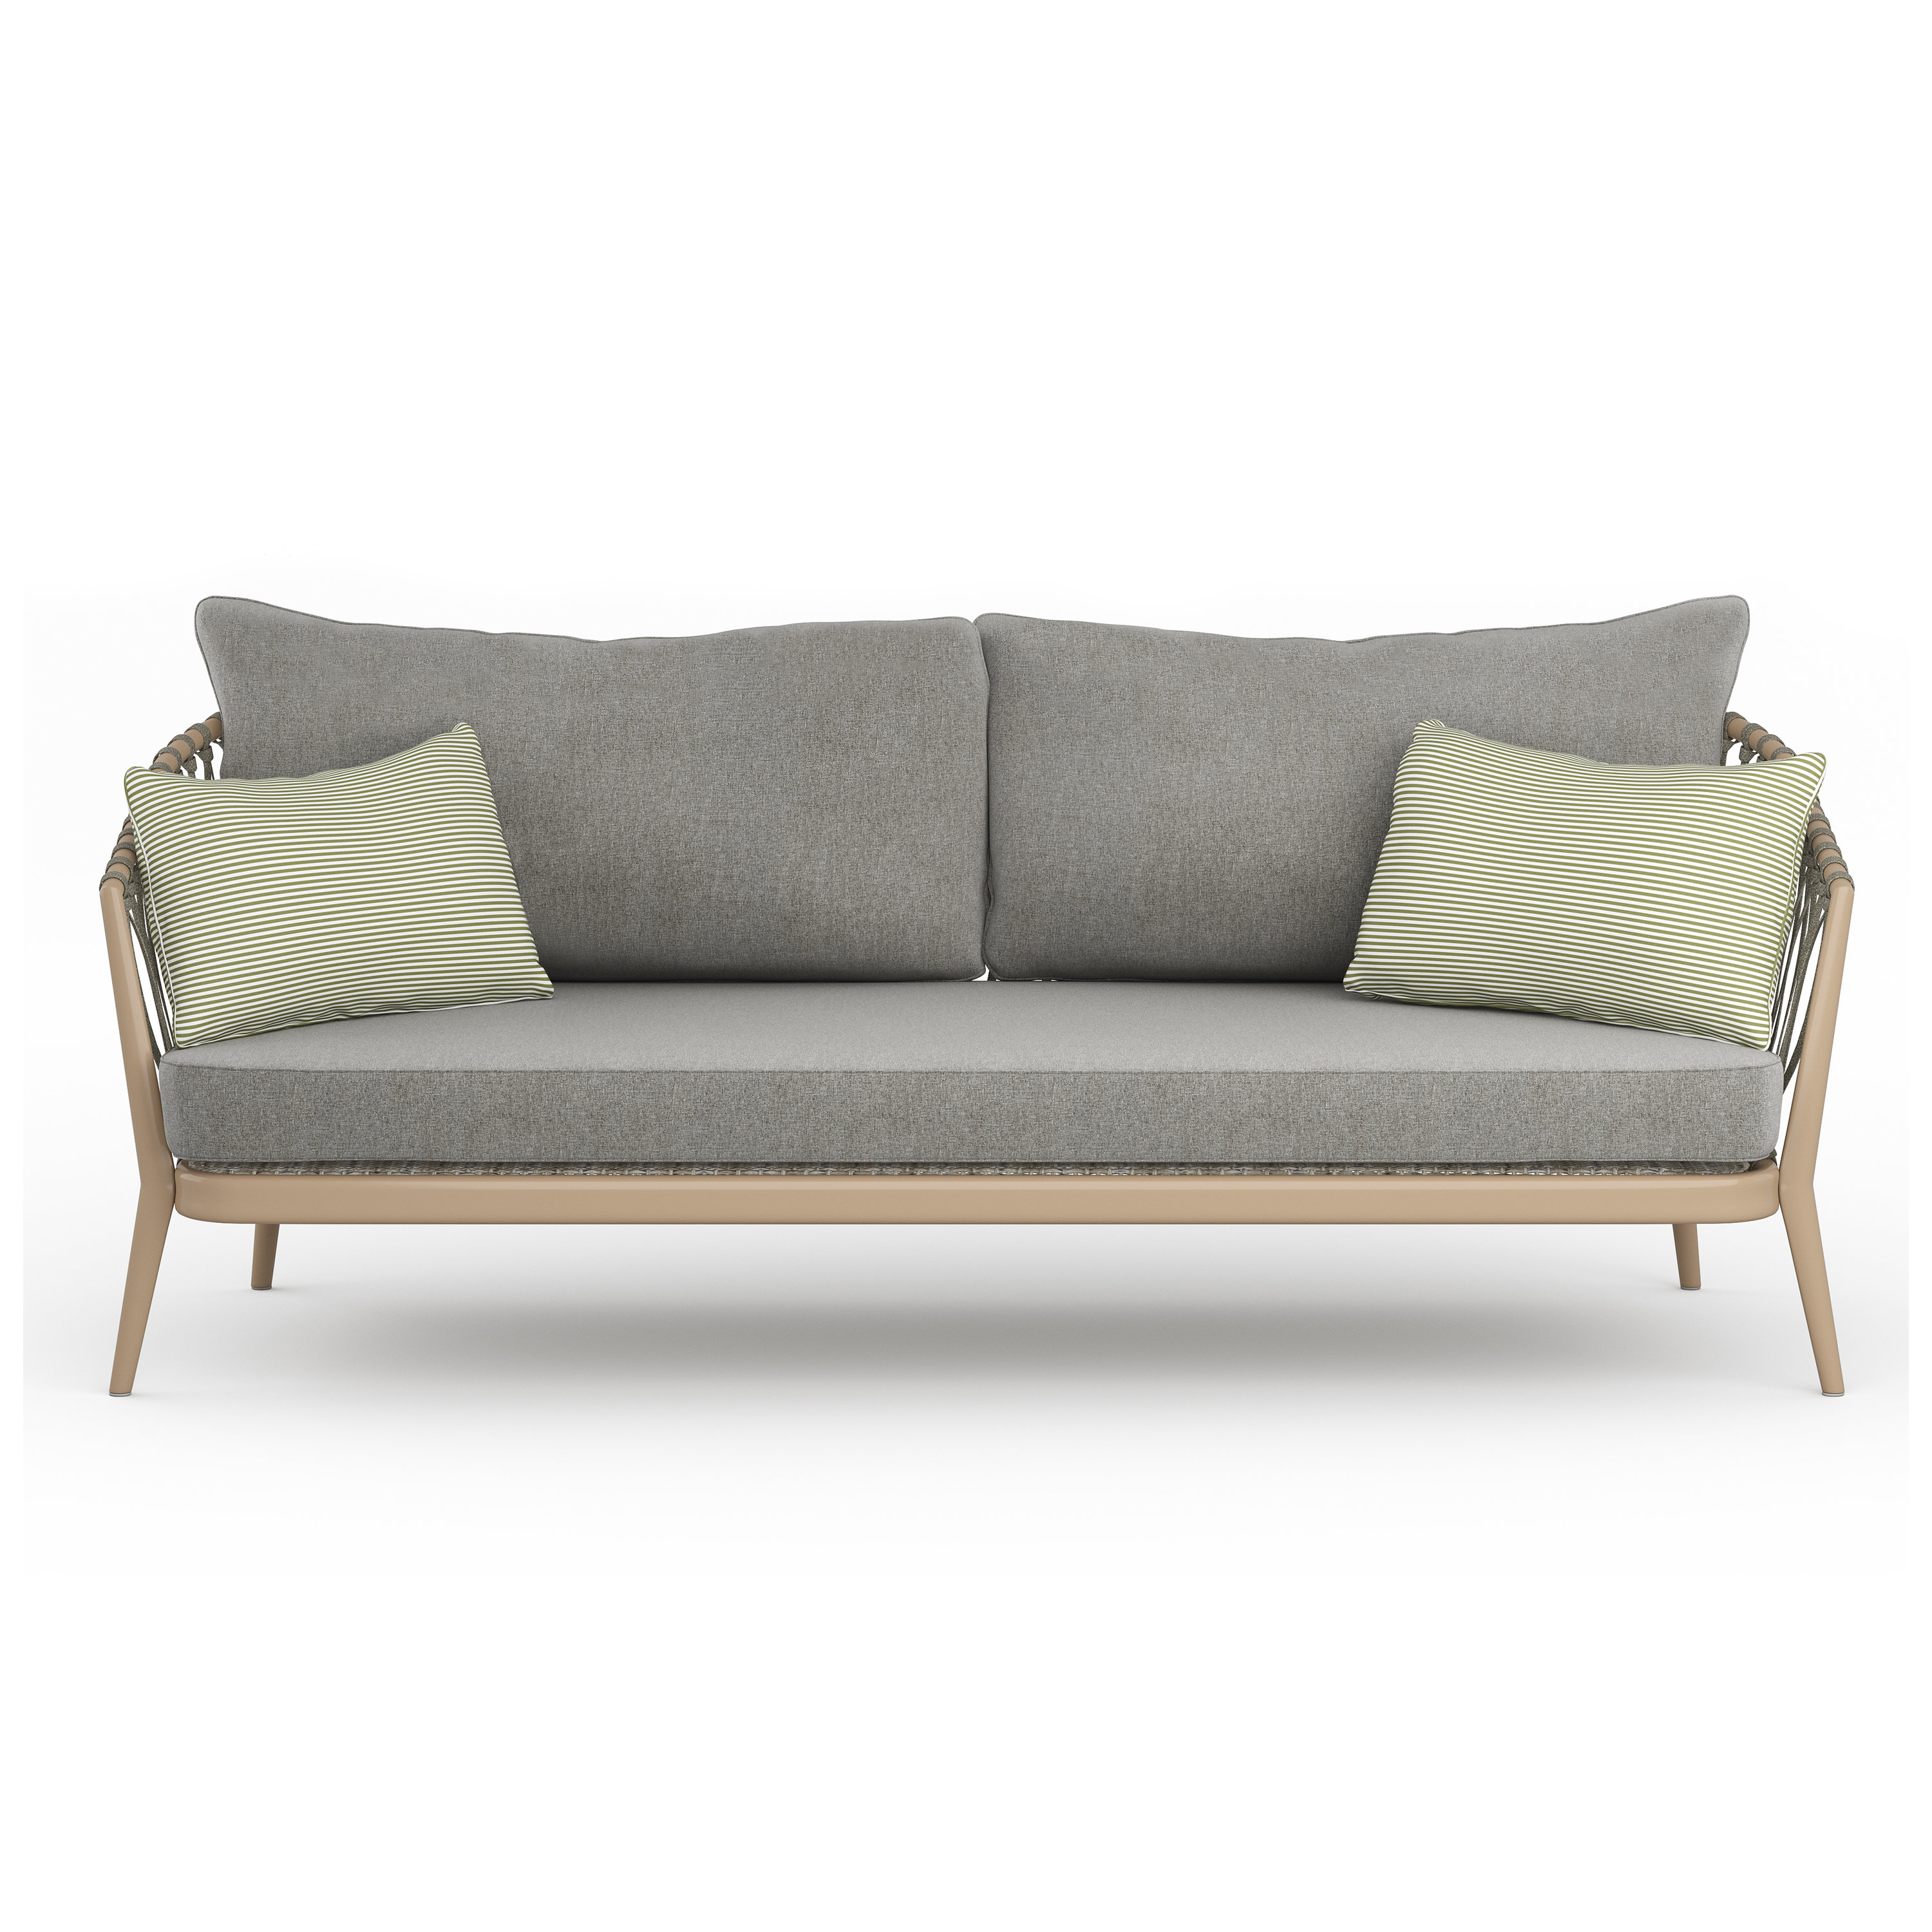 lexicon Dom credit Bayou Breeze Belize 75 inch Wide Contemporary Outdoor Sofa in Sand  DriftPolyester Fabric | Wayfair